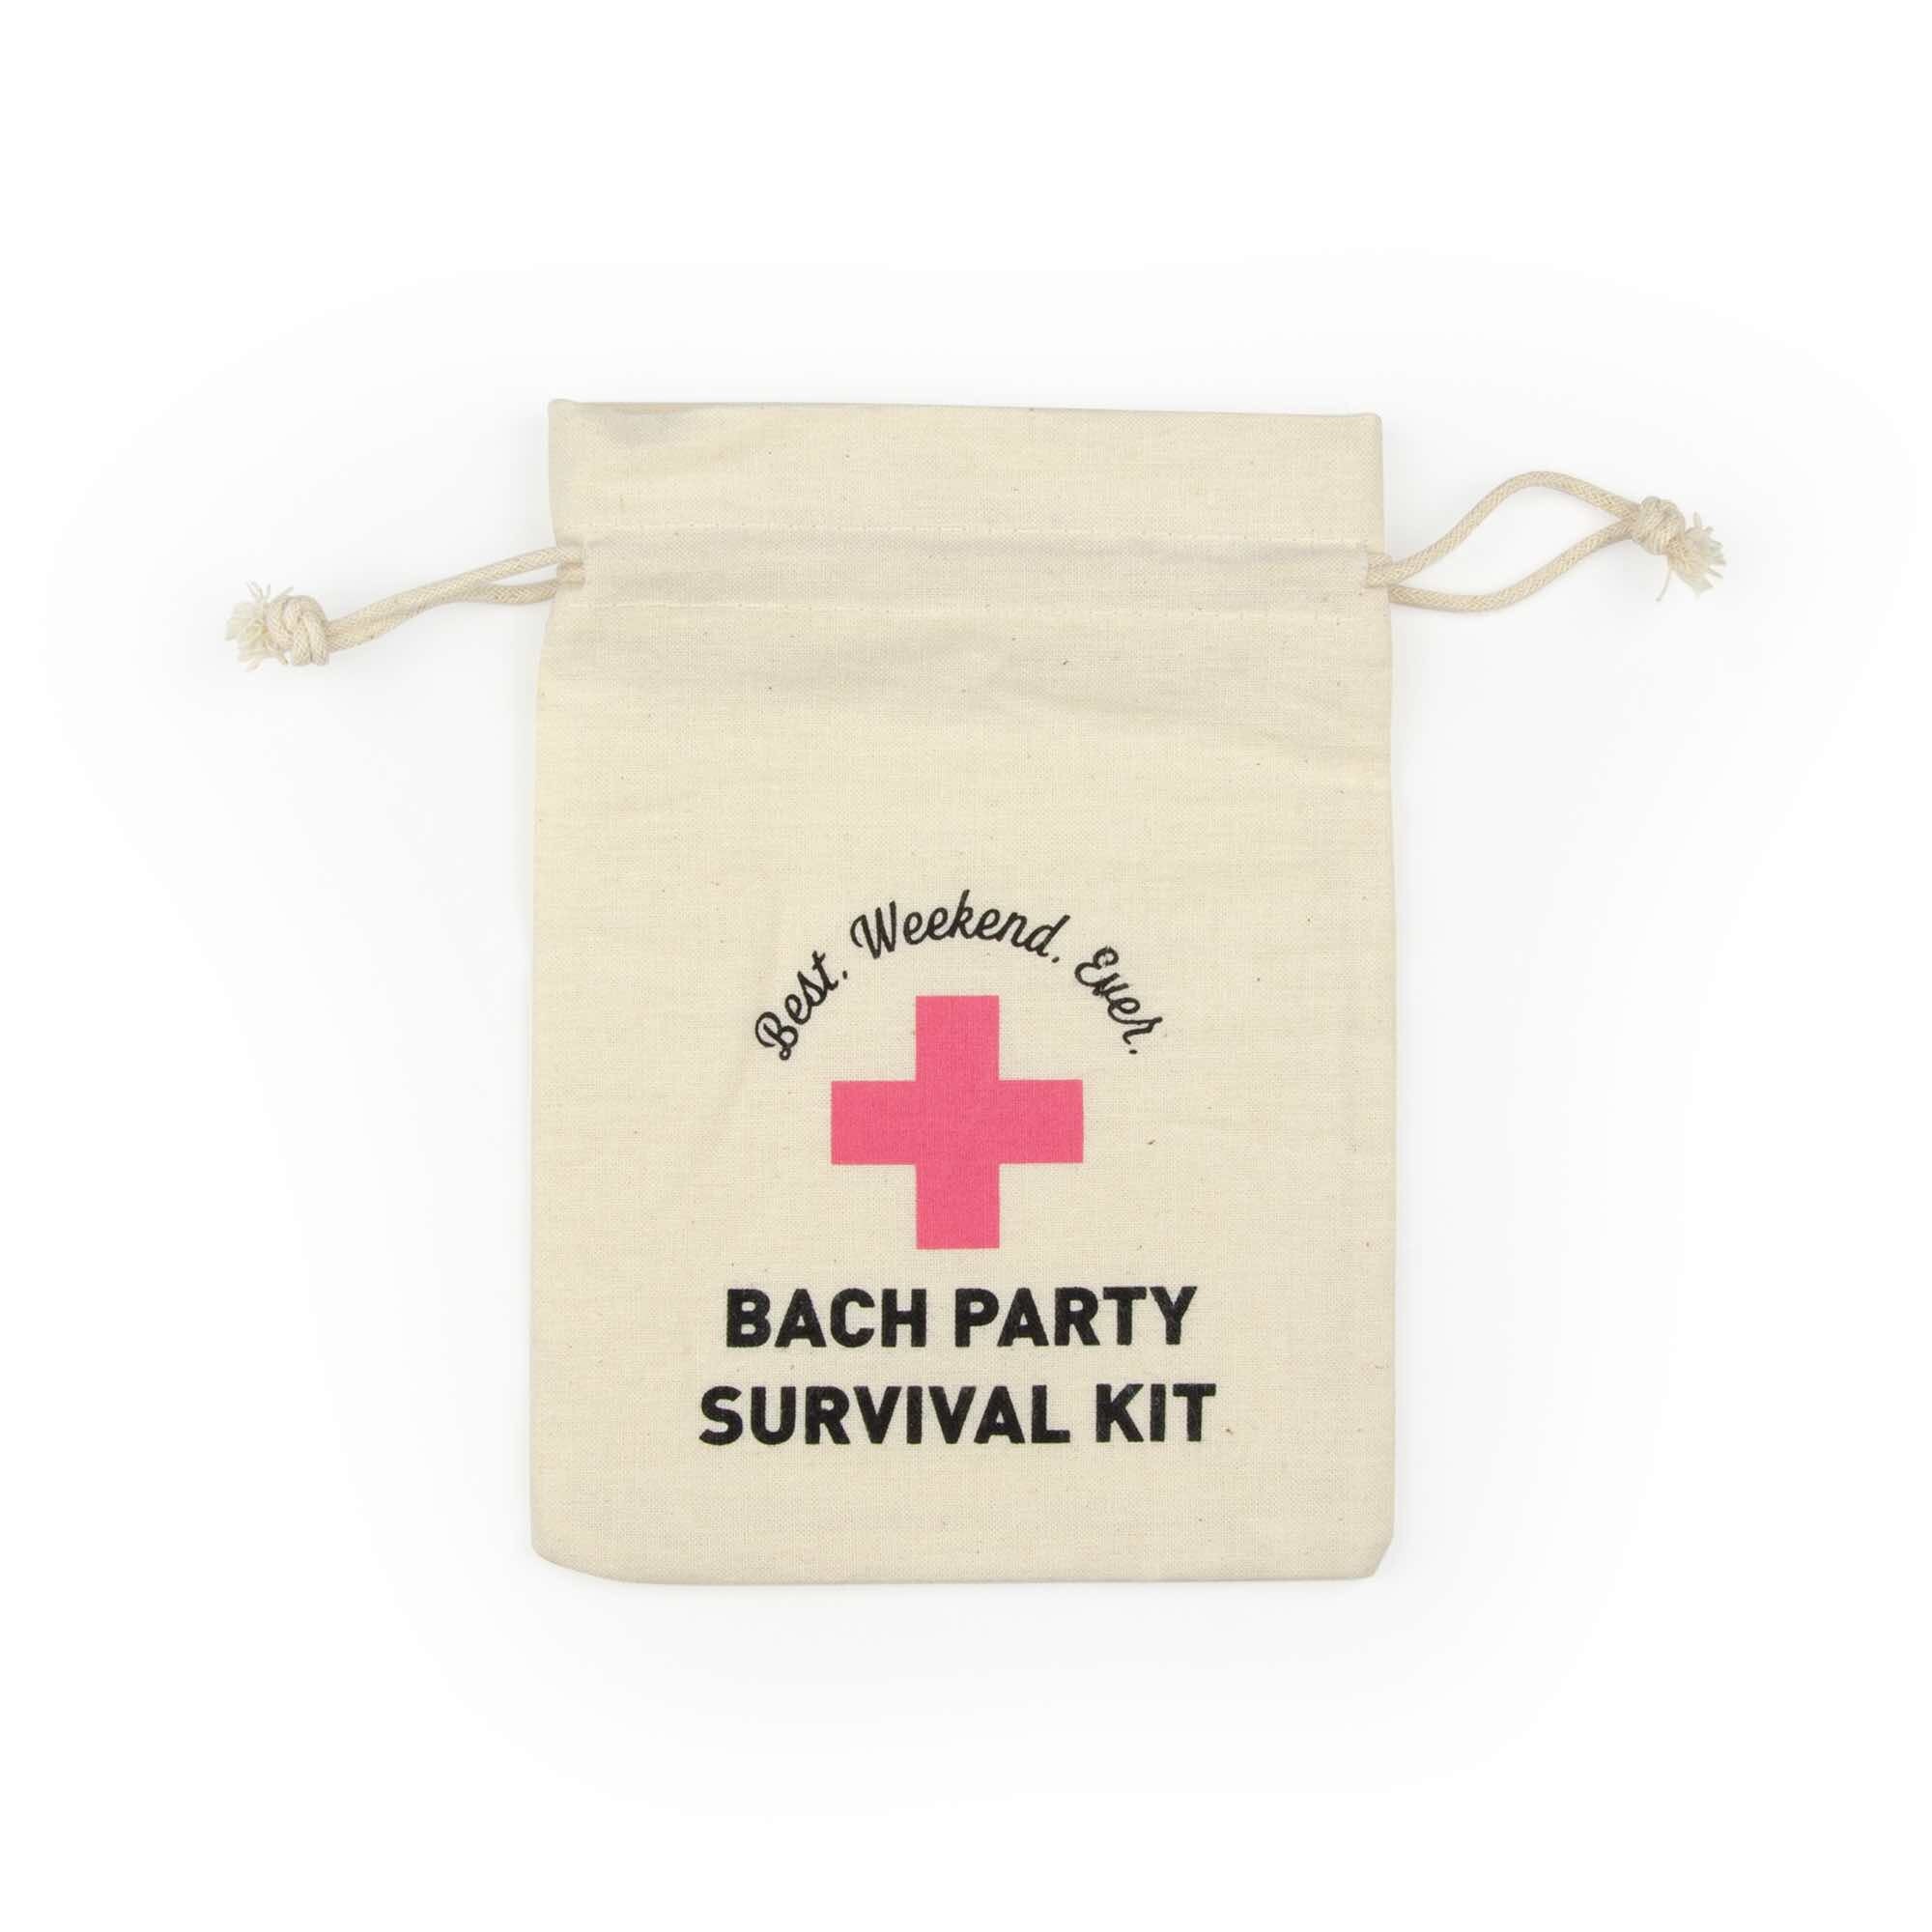 Hangover Survival Kit Bag with Thick tag Black Corporate Party Bride to Be 11 Items in an Organza Gift Bag for Wedding 